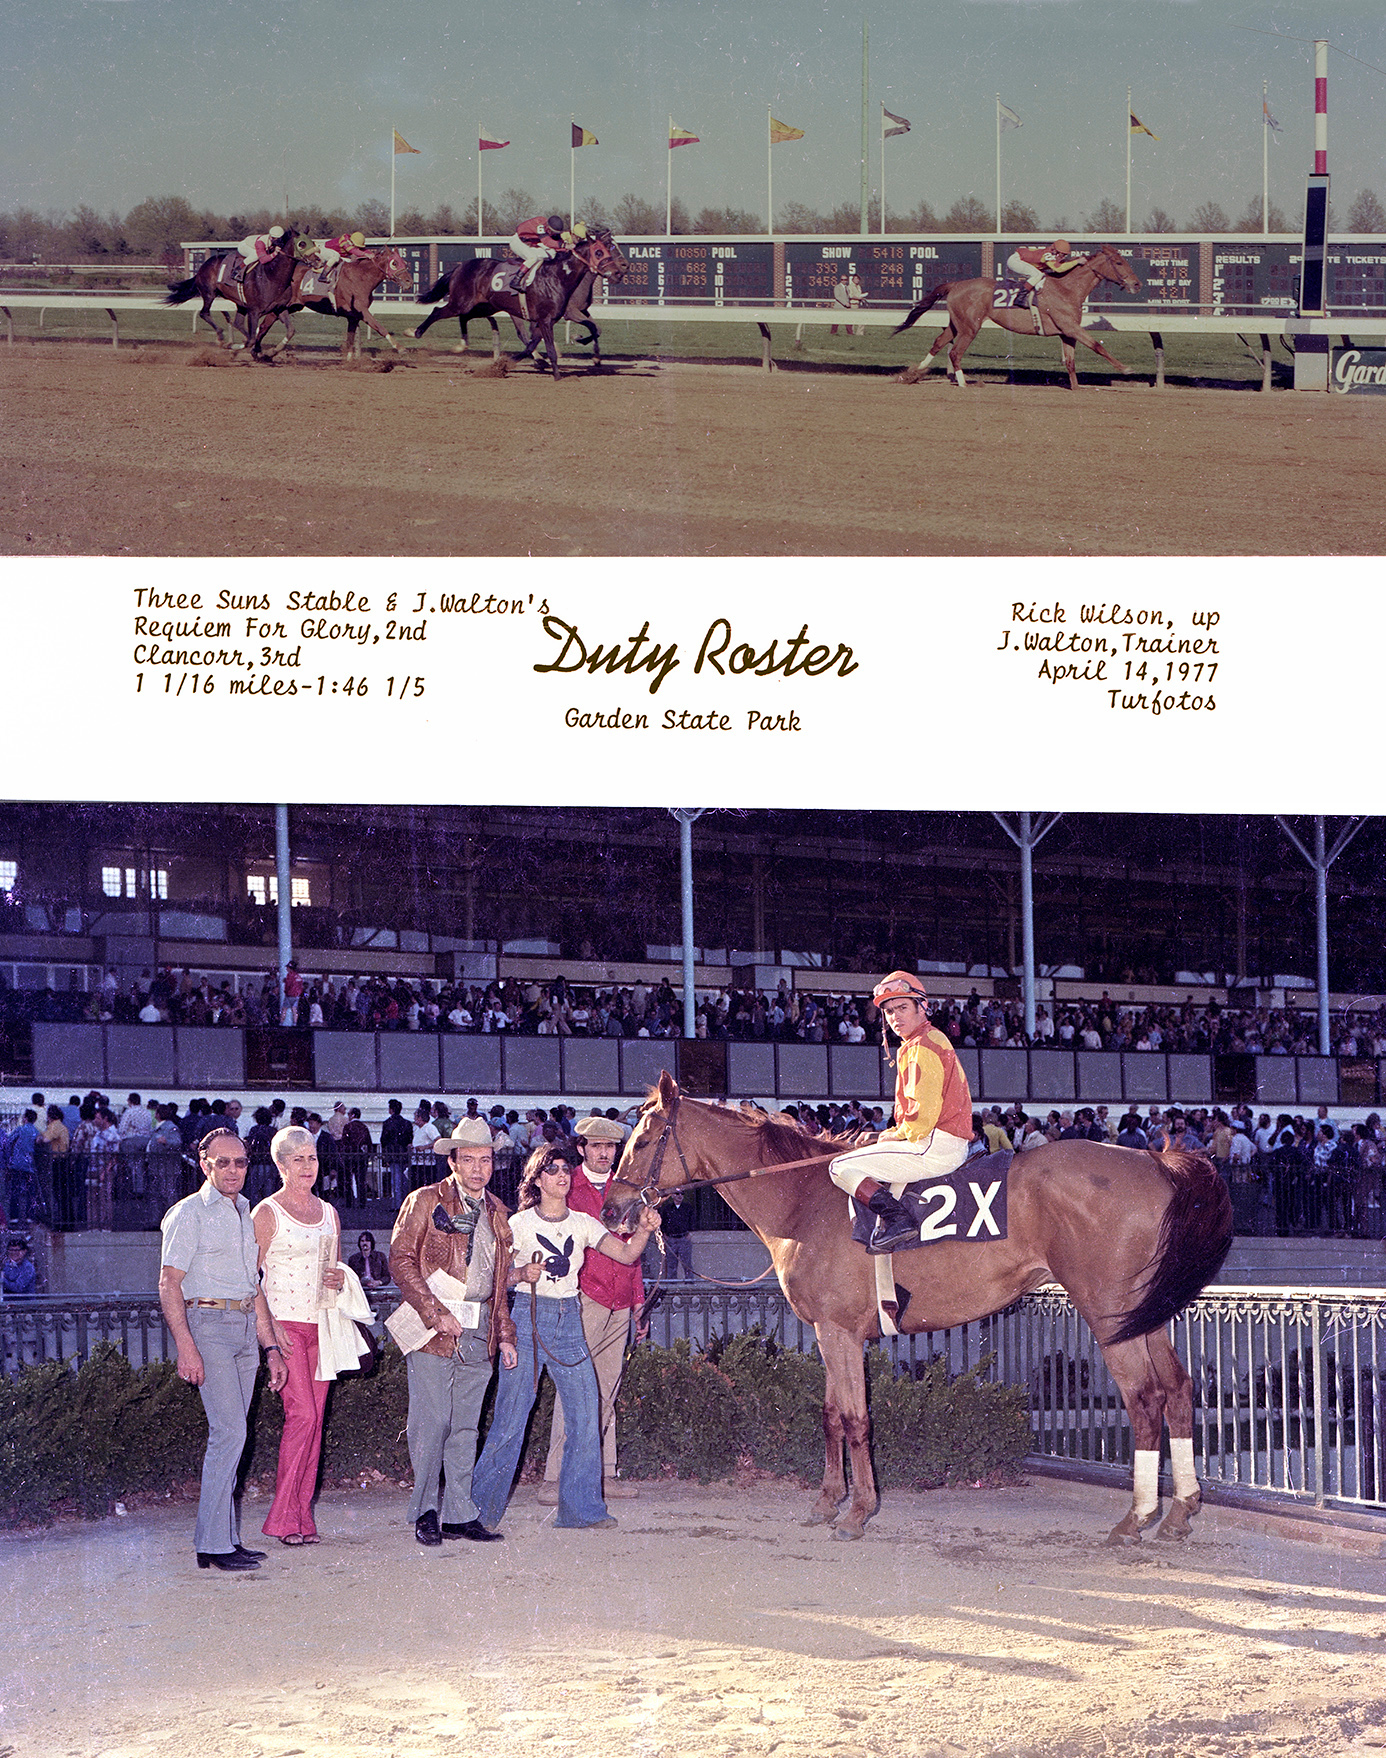 Duty Roster, after winning at Garden State Park on April 14, 1977. At the time, there was a small but growing fire in the building; some patrons can be seen looking off to their left. The entire building was destroyed. (Jim Raftery Turfotos)